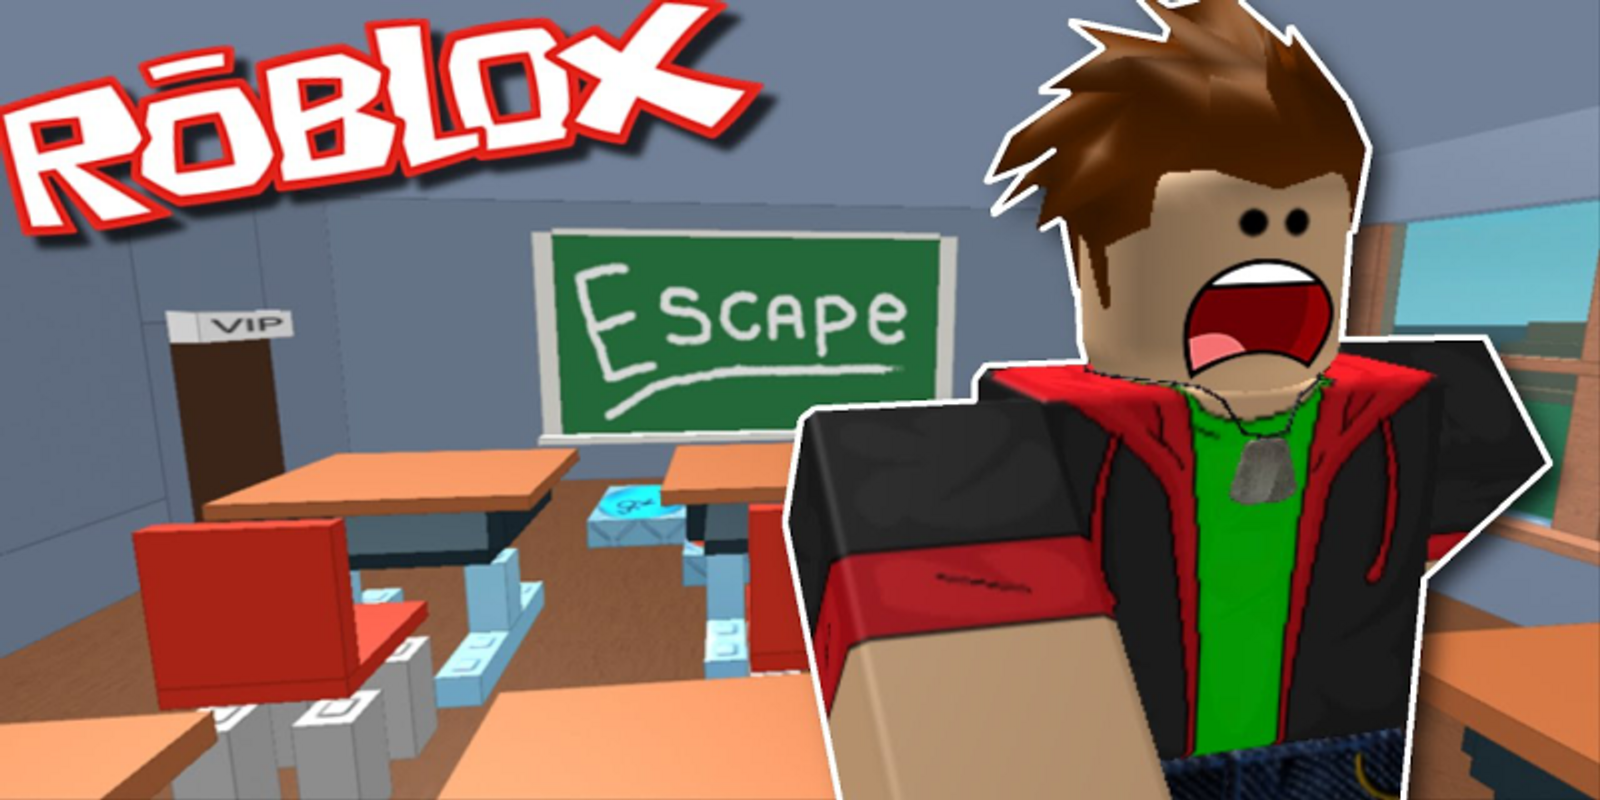 Roblox Escape Obby Get Robux Survey - roblox escape evil youtubers obby video dailymotion